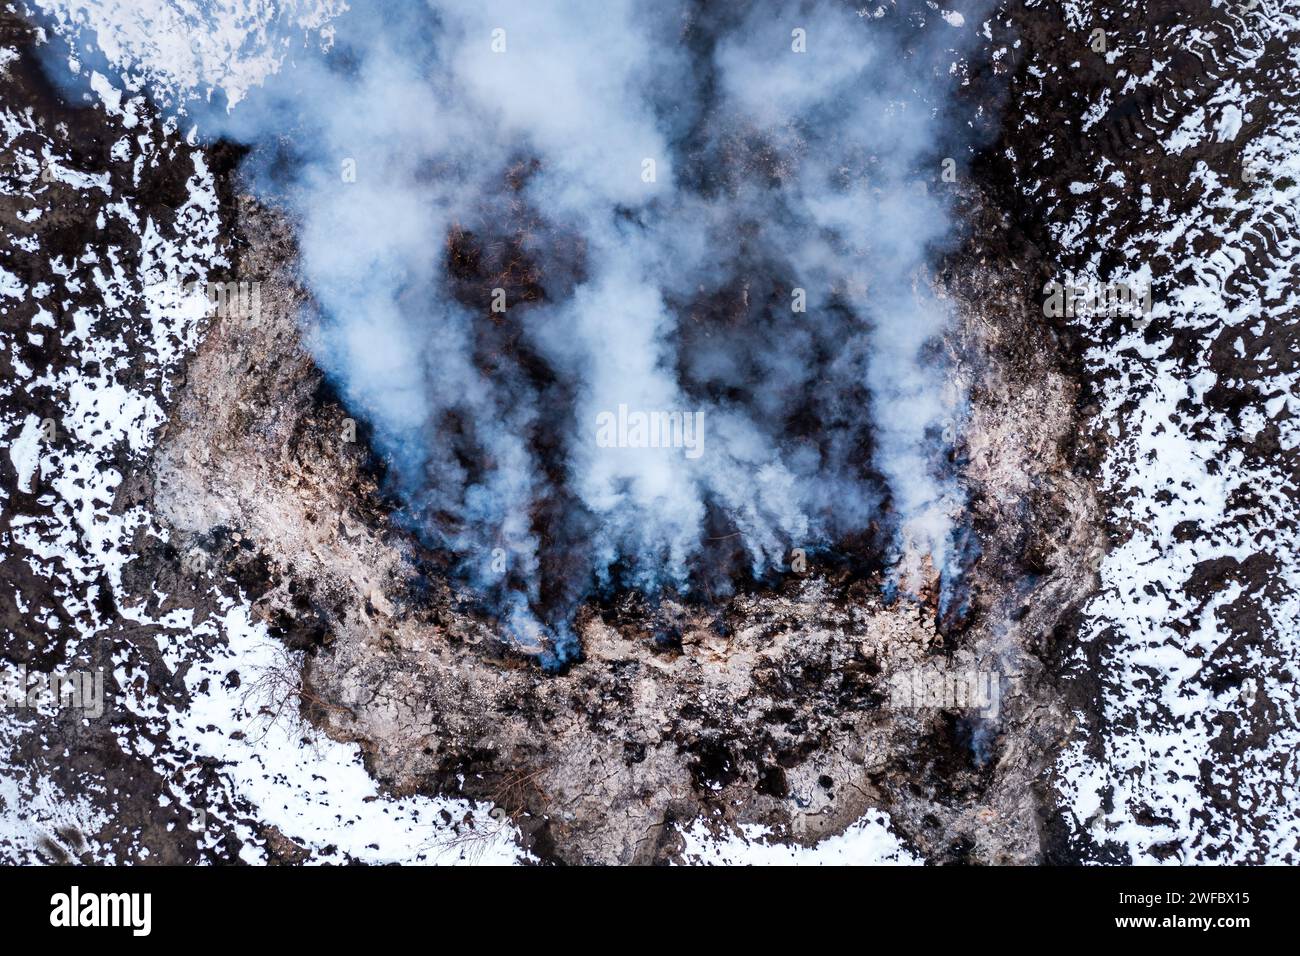 Burning manure pile at farm, air pollution and contamination, aerial shot from drone pov, high angle view Stock Photo